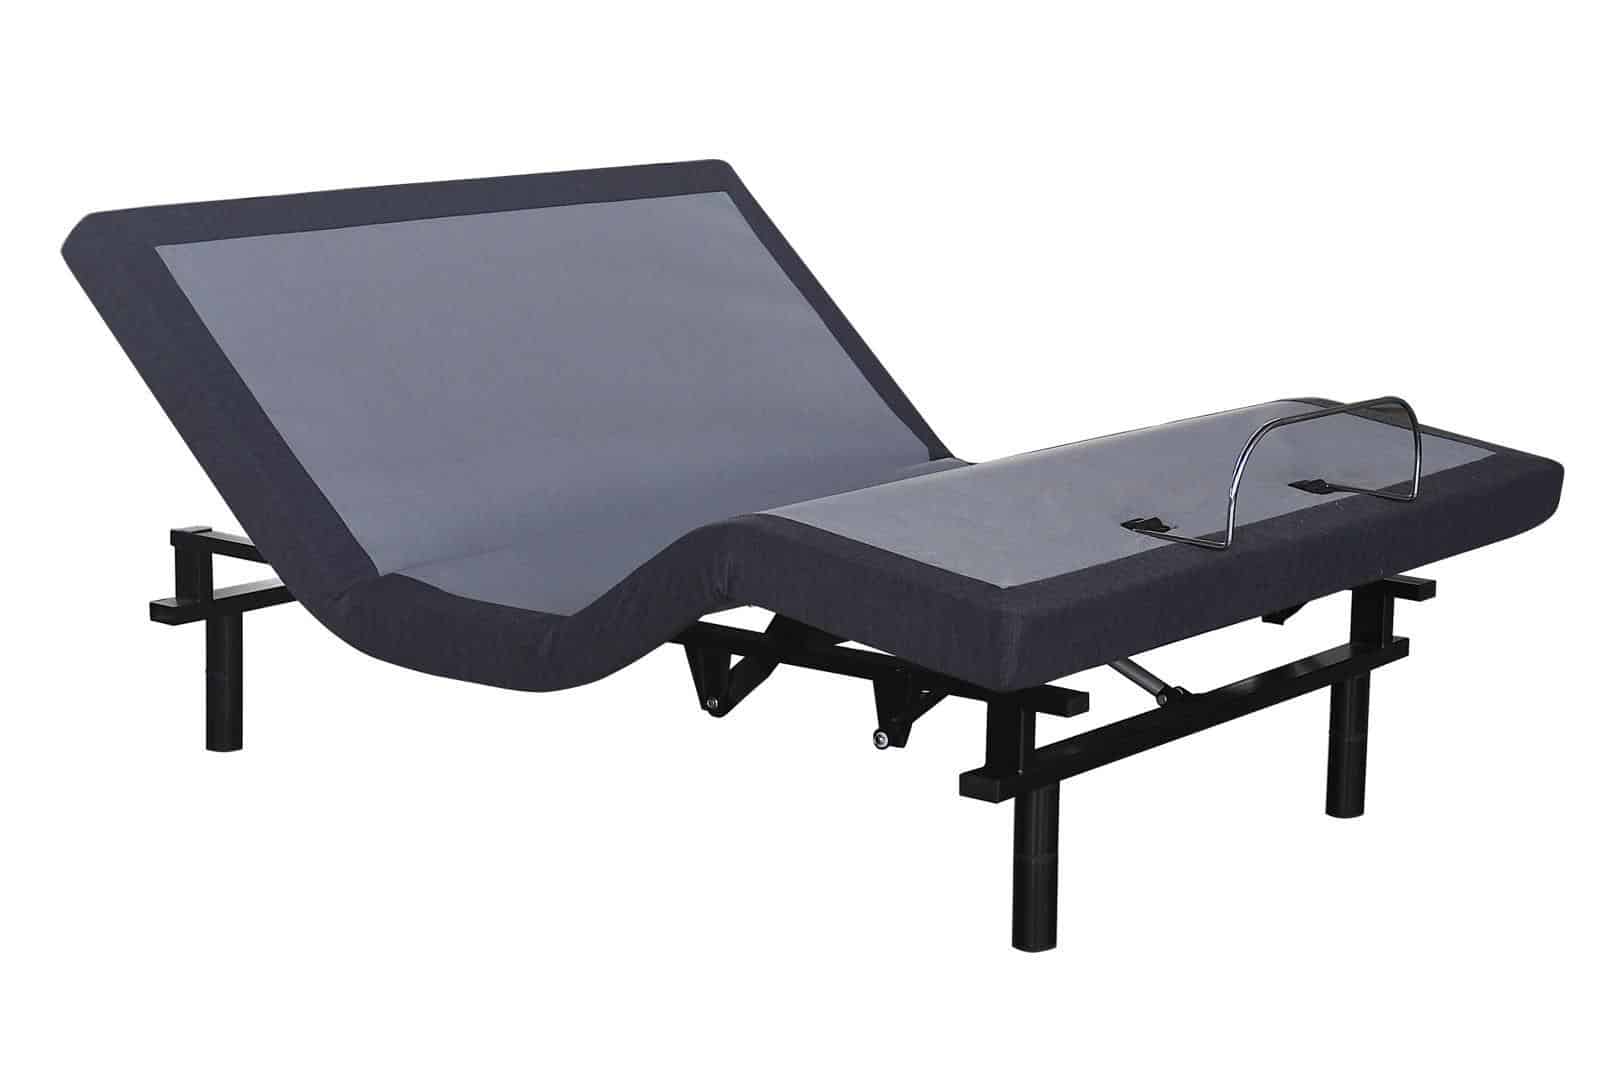 ADJUSTABLE BEDS PICTURE